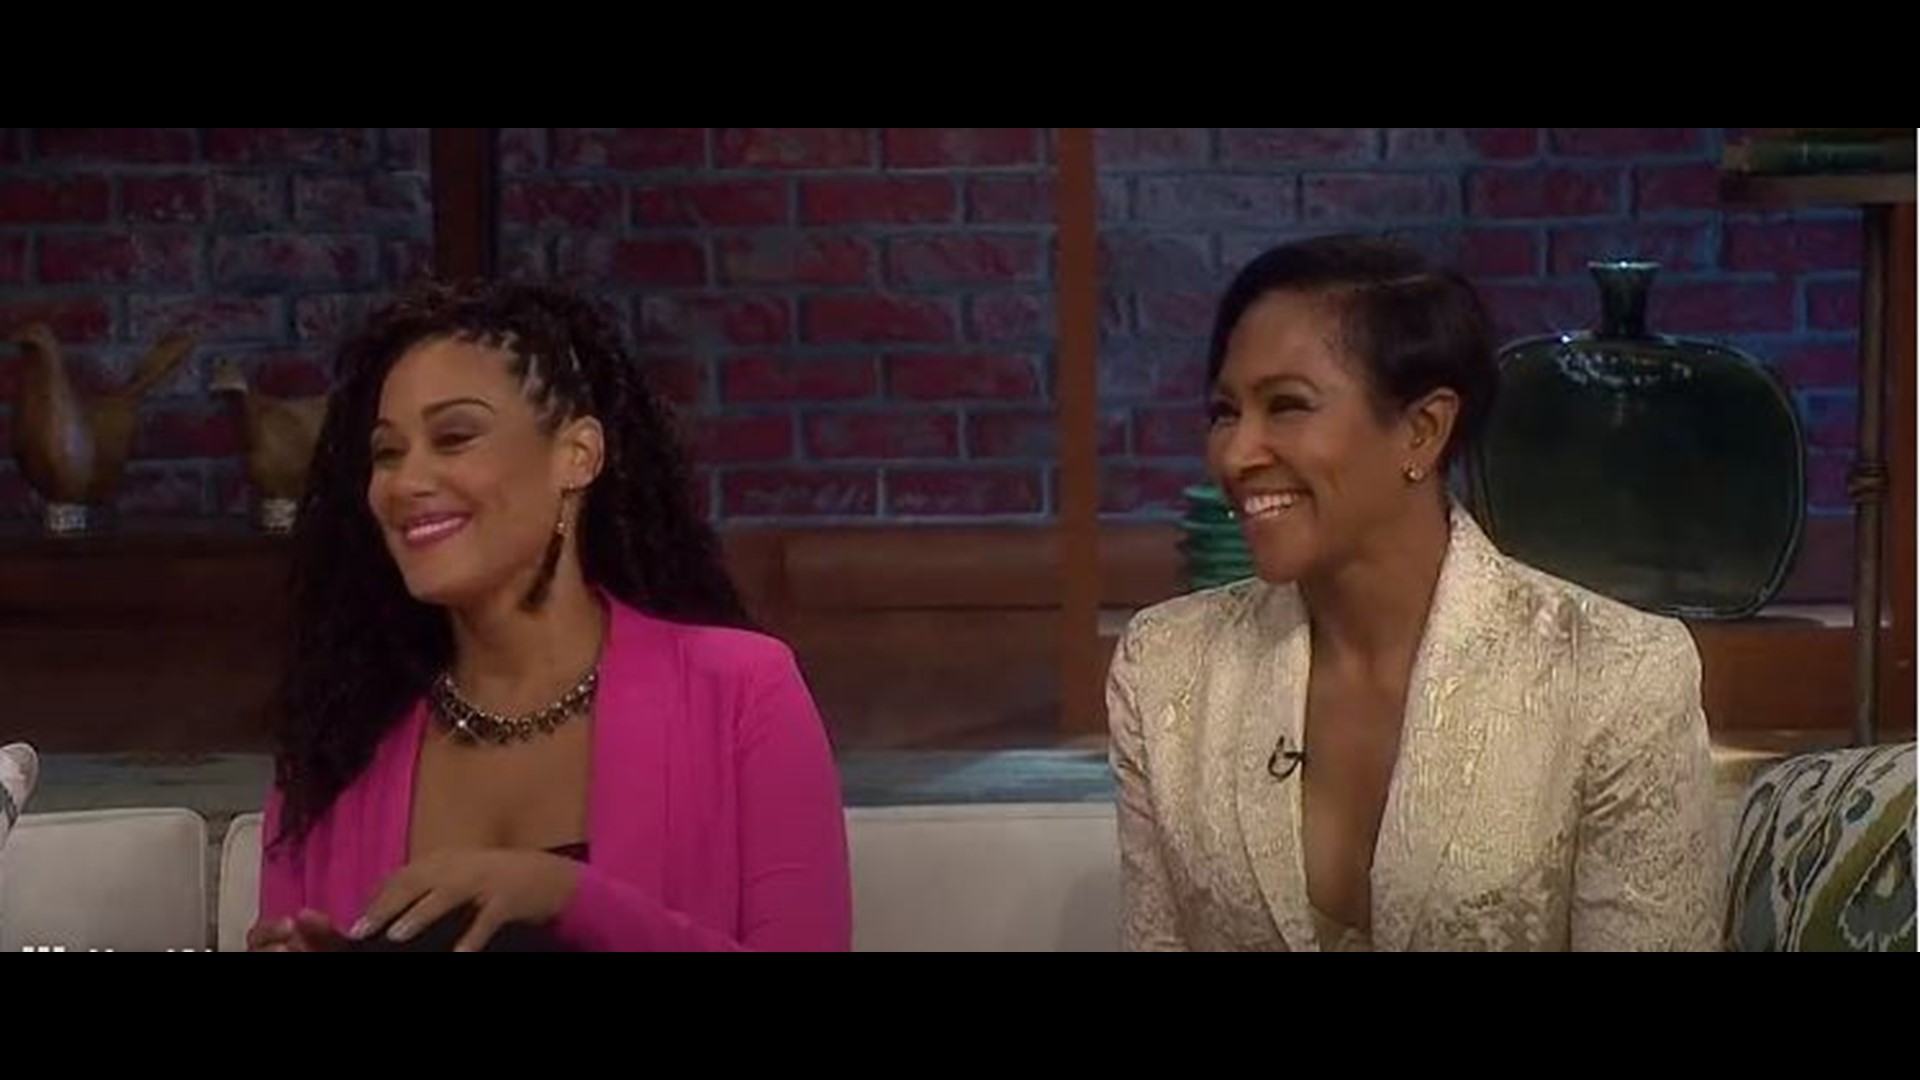 Cynthia Kaye McWilliams and Terri Vaughn chat about their new Christmas movie, 'Twas the Chaos Before Christmas, premiering on BET Dec. 7, 2019.